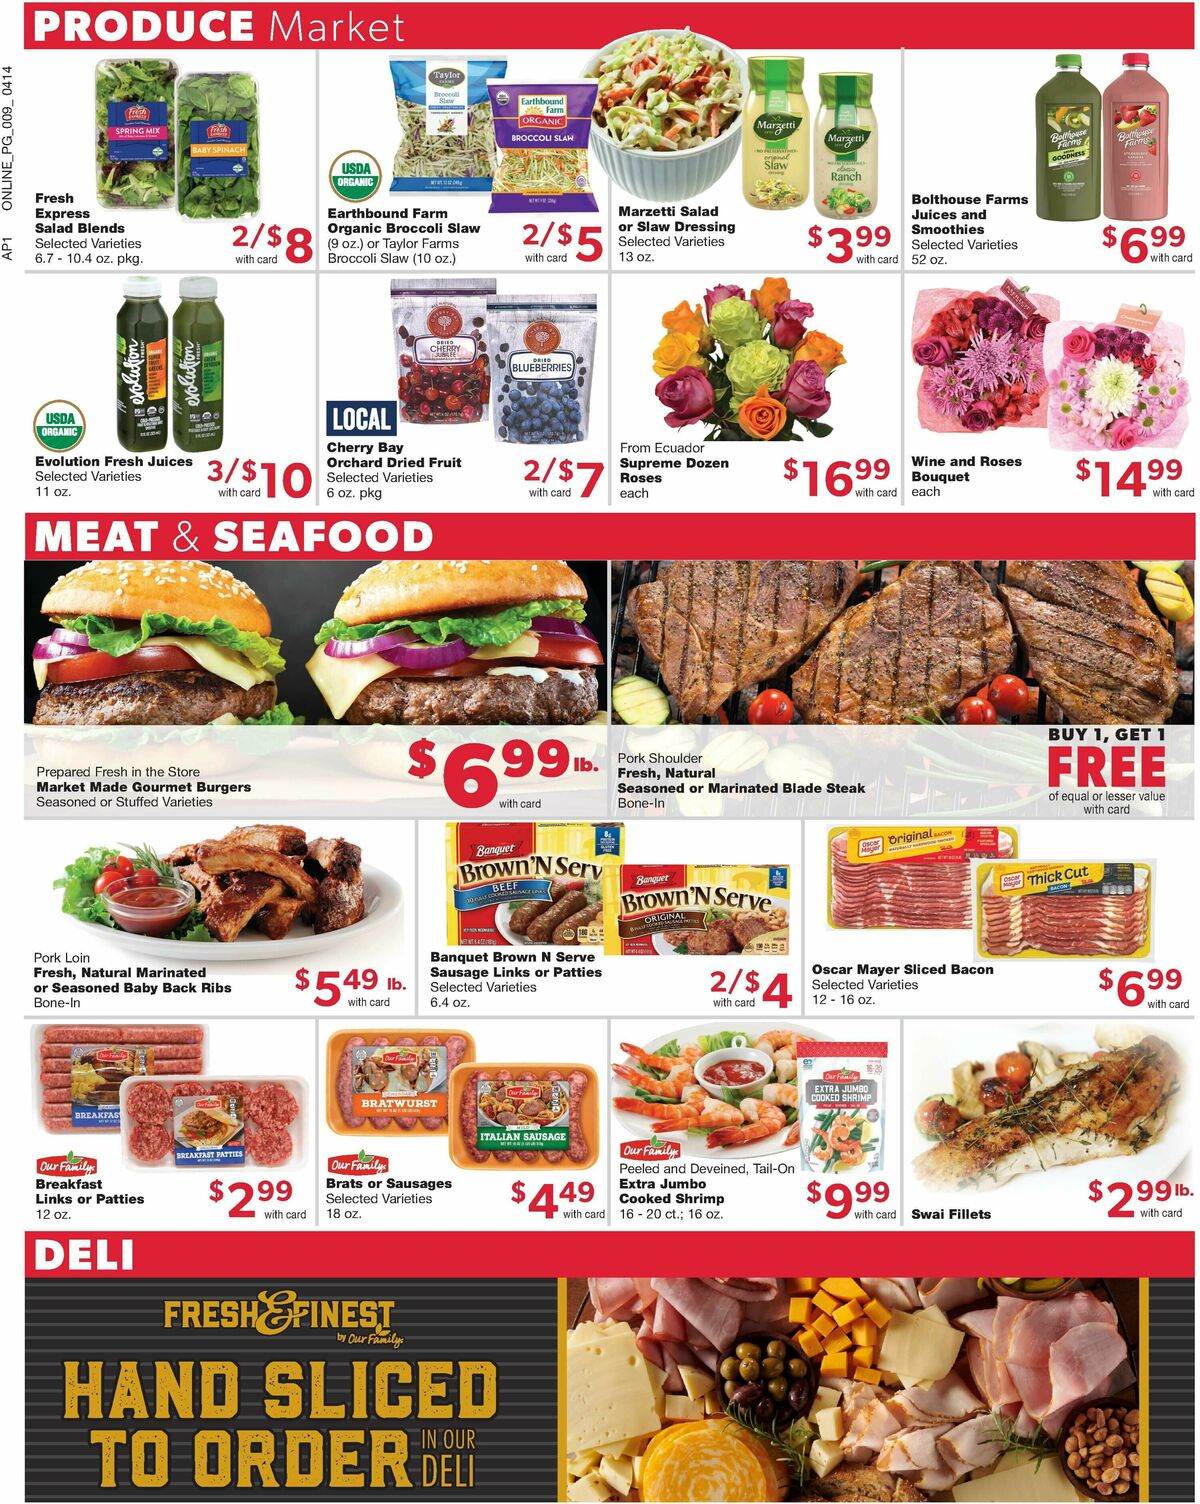 Family Fare Weekly Ad from April 14